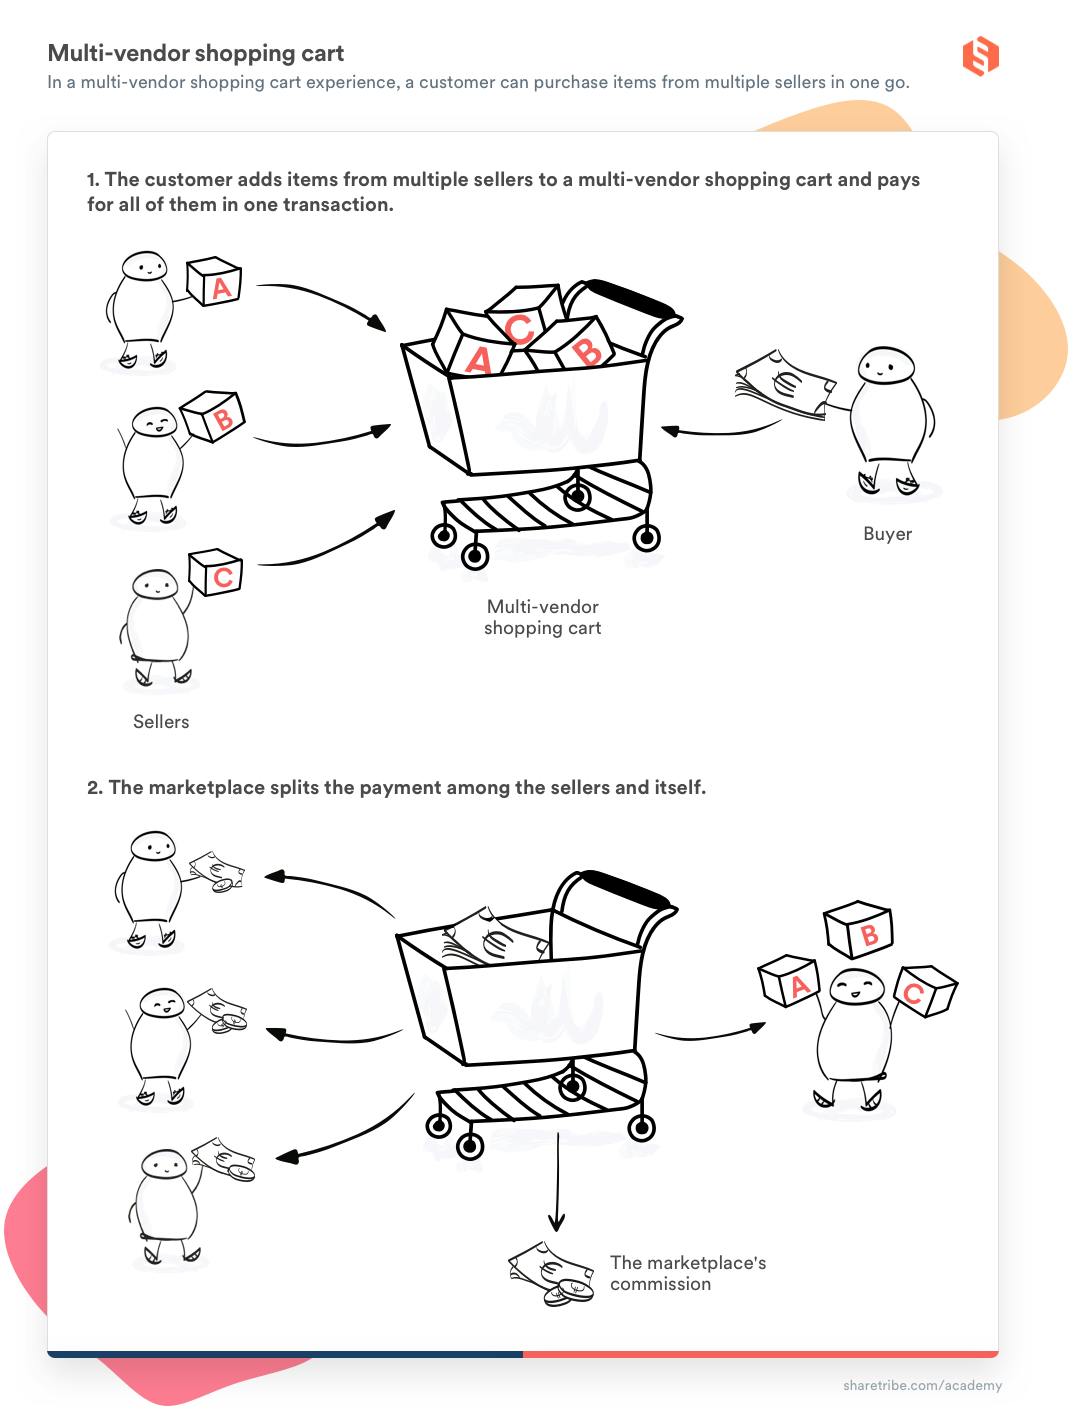 A two-part image visualizing a multi-vendor shopping cart used by websites like Amazon. Part 1: The customer adds items from multiple sellers to a multi-vendor shopping cart and pays for all of them in one transaction.The text is visualized as follows: On the left, there are three sellers with boxes. The boxes are placed in a shopping cart. On the right side of the cart, a buyer figure is offering euro notes.Part 2: The marketplace splits the payment among the sellers and itself.This is visualized by the customer hap